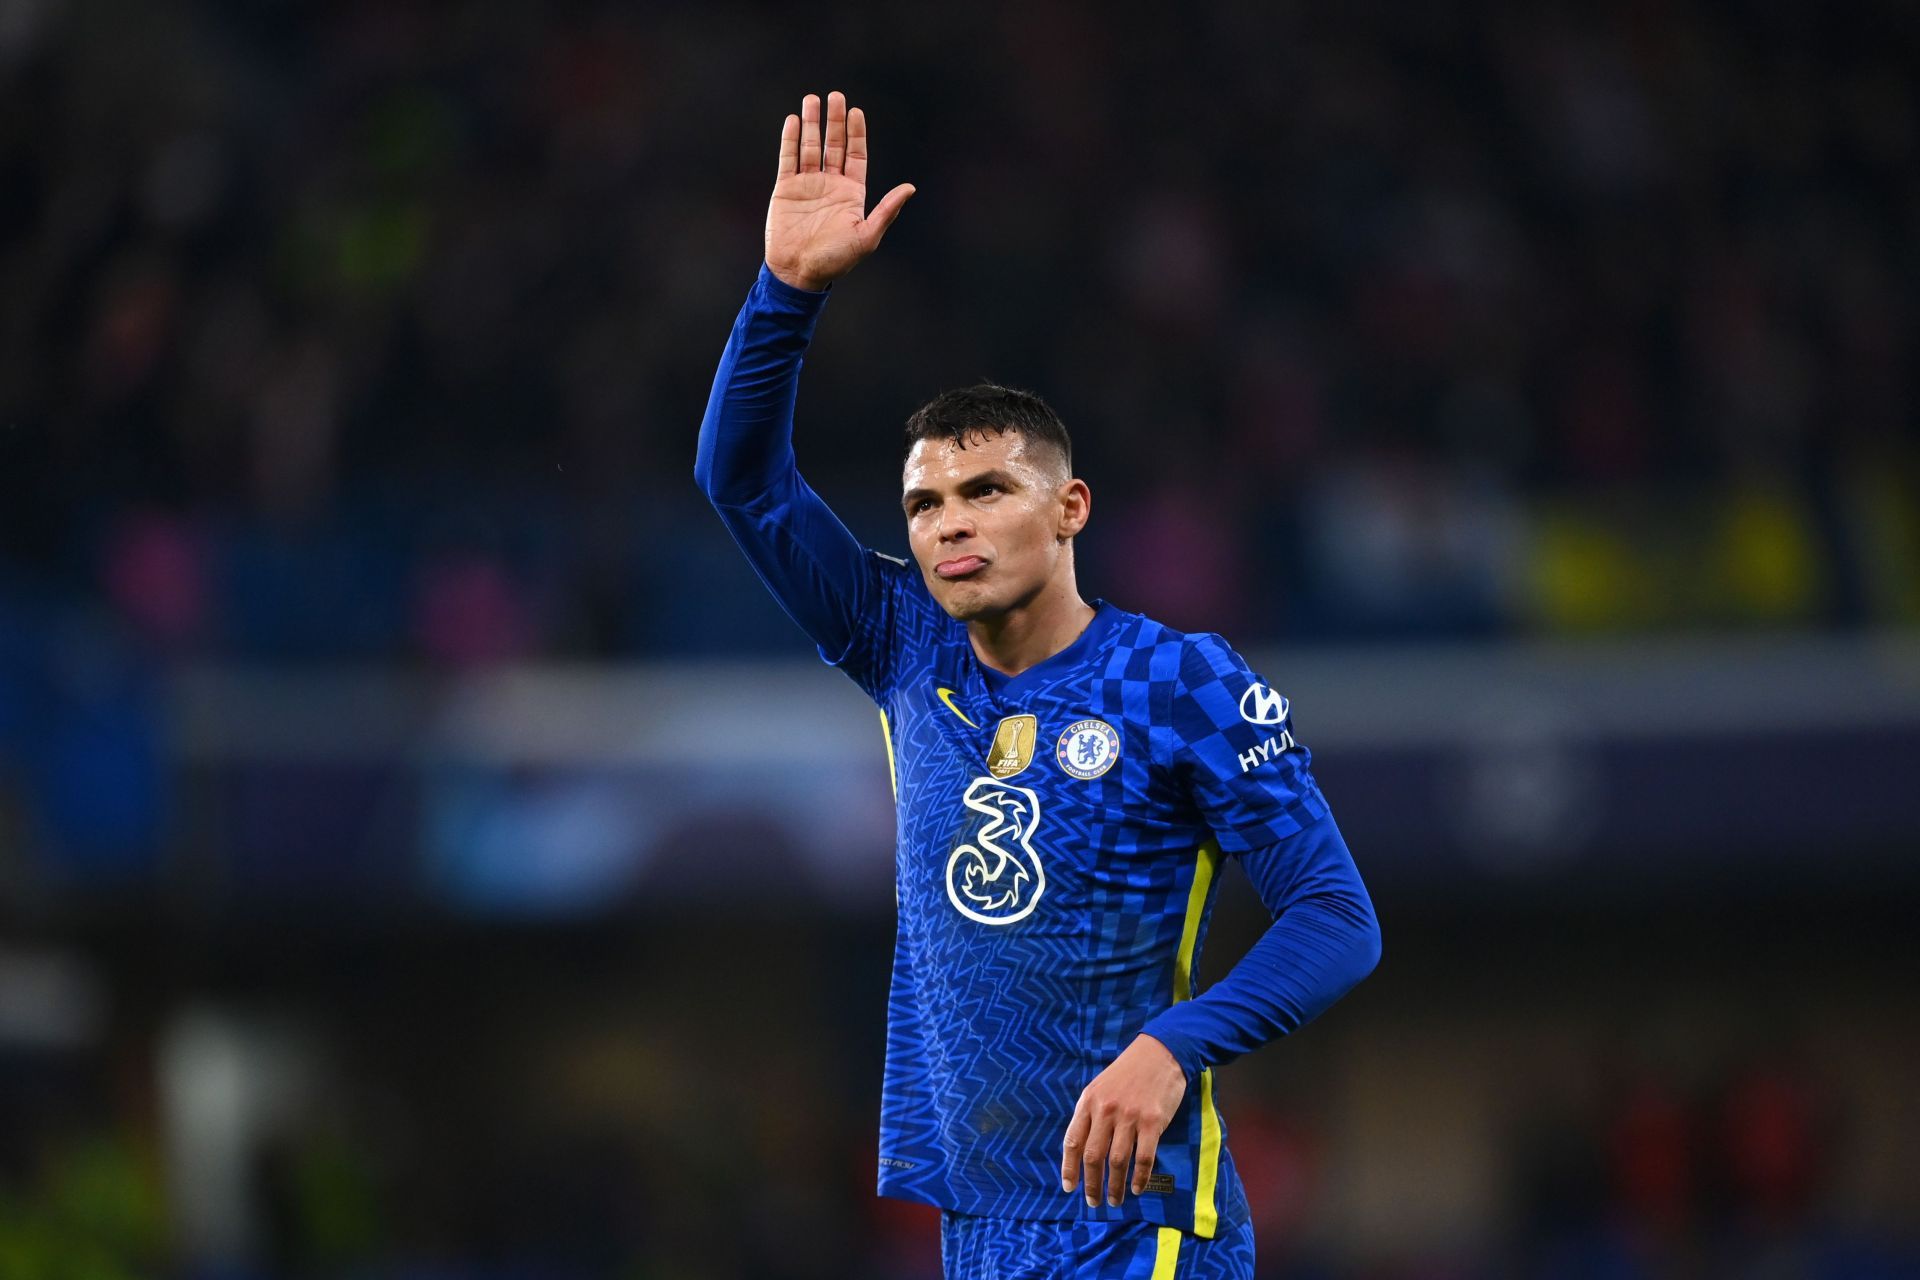 Thiago Silva with another reliable performance at the back to lead Chelsea into the semi-finals